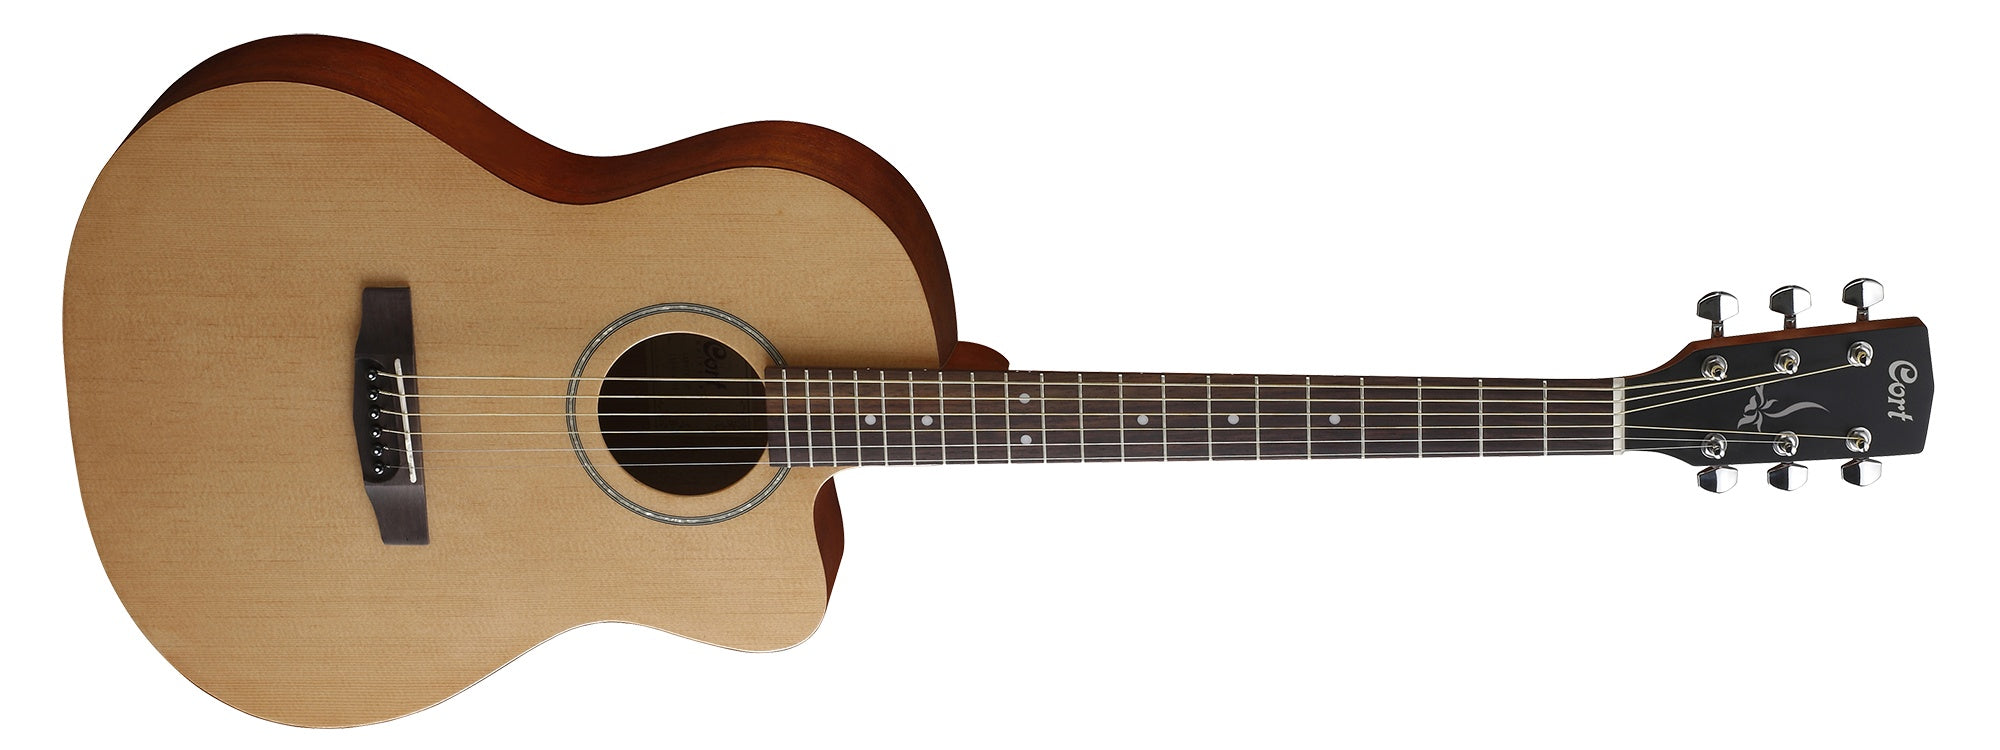 Cort Jade 1 Open Pore, Acoustic Guitar for sale at Richards Guitars.